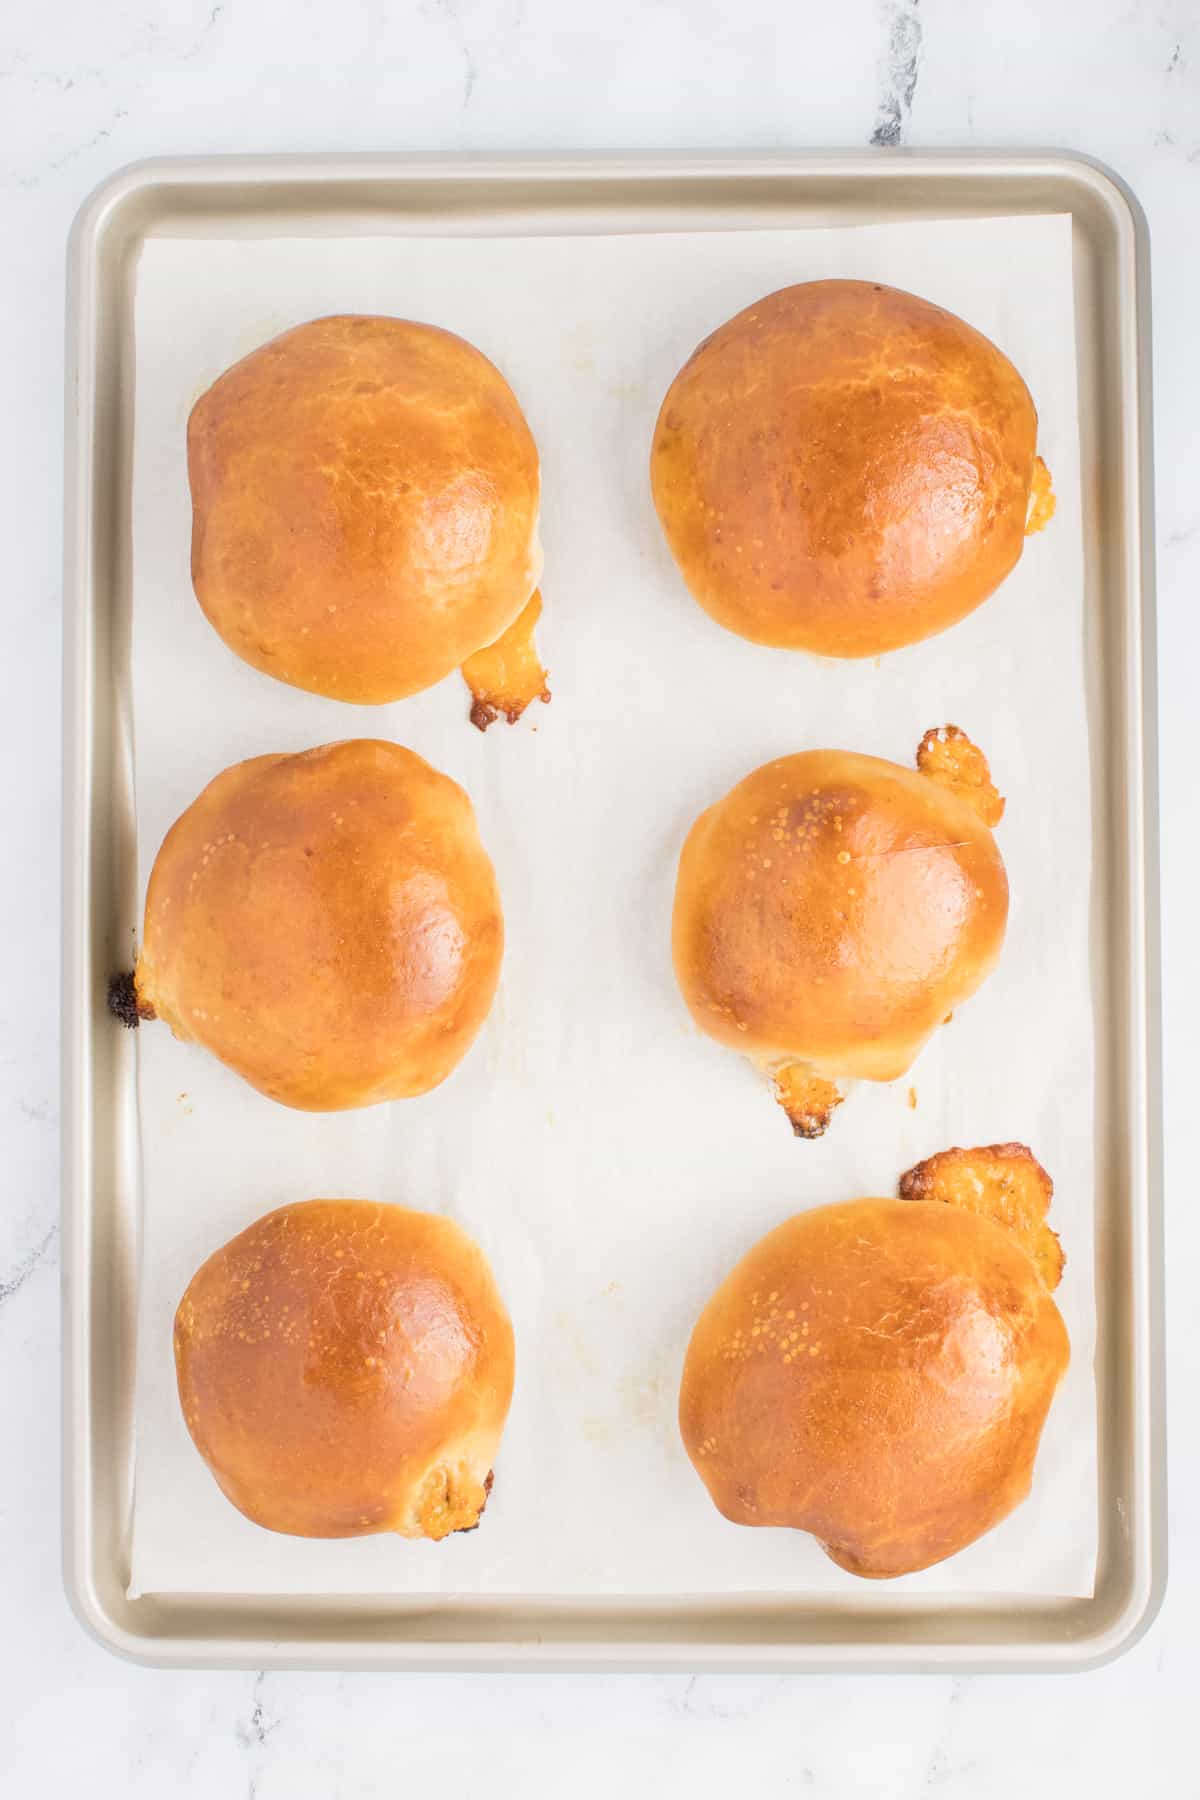 This image showcases baked runzas arranged on a baking pan. The runzas are cooked to a golden-brown perfection, displaying a delicious outer crust.